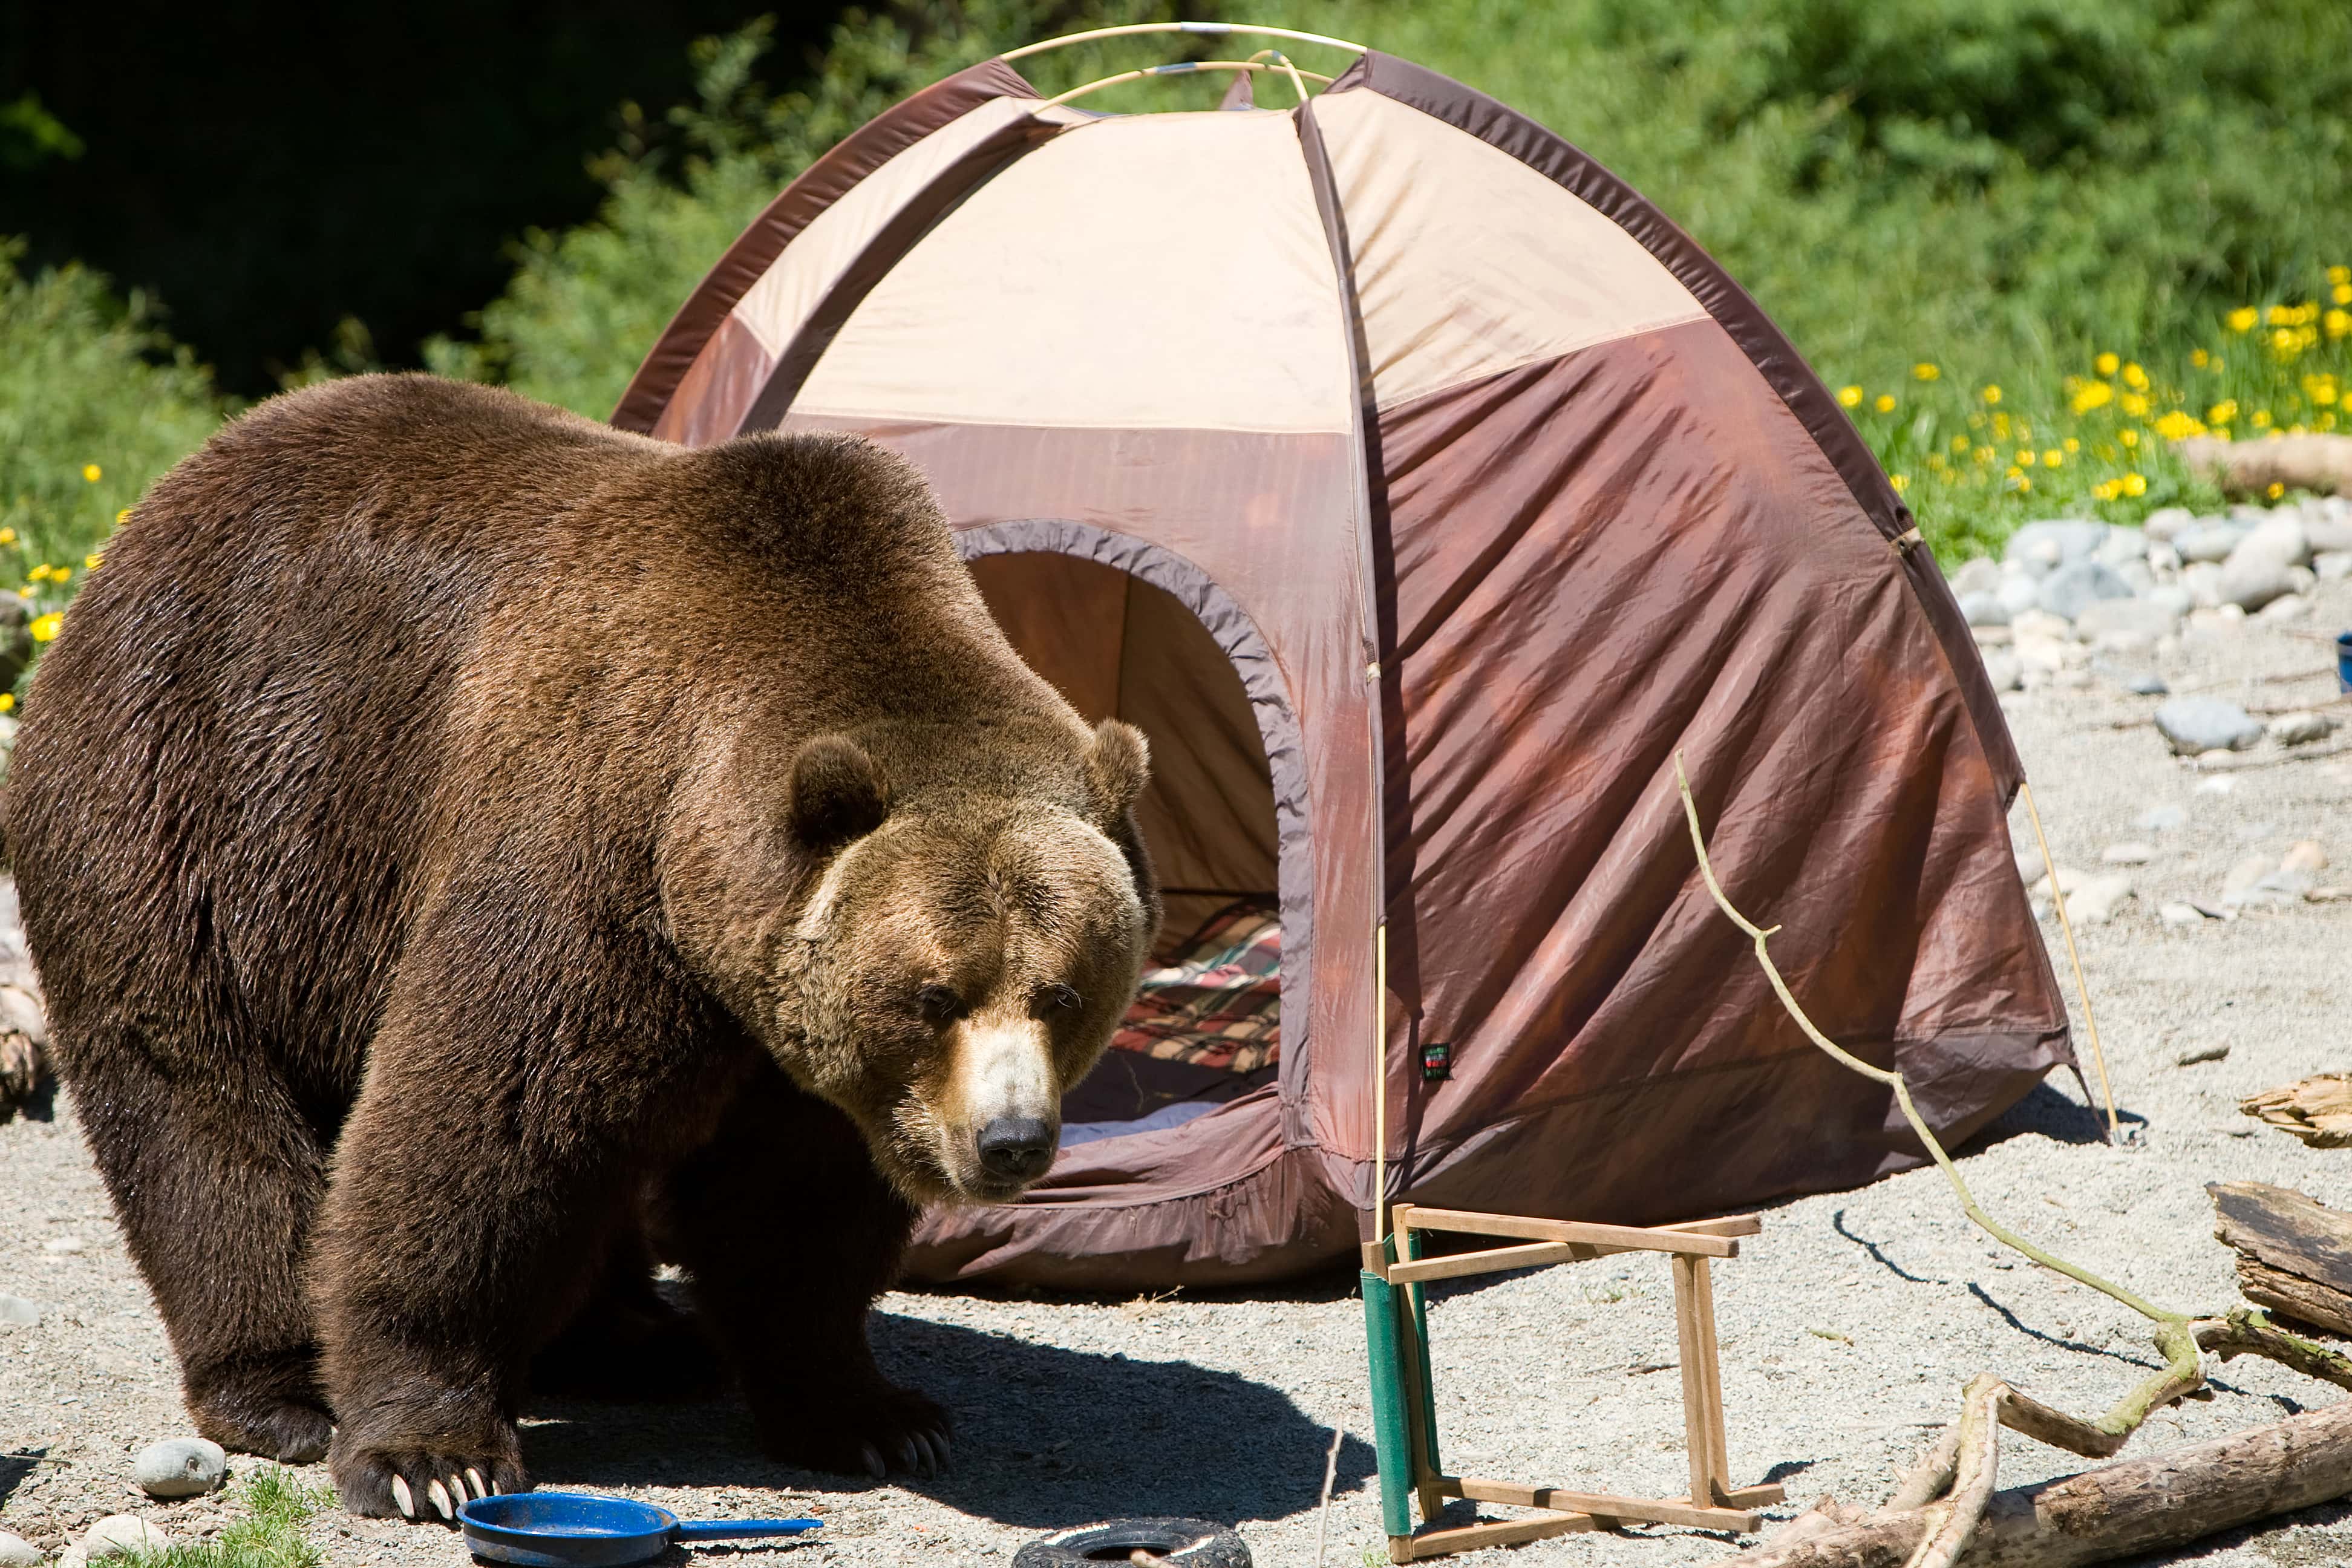 Terrifying Camping Experiences facts